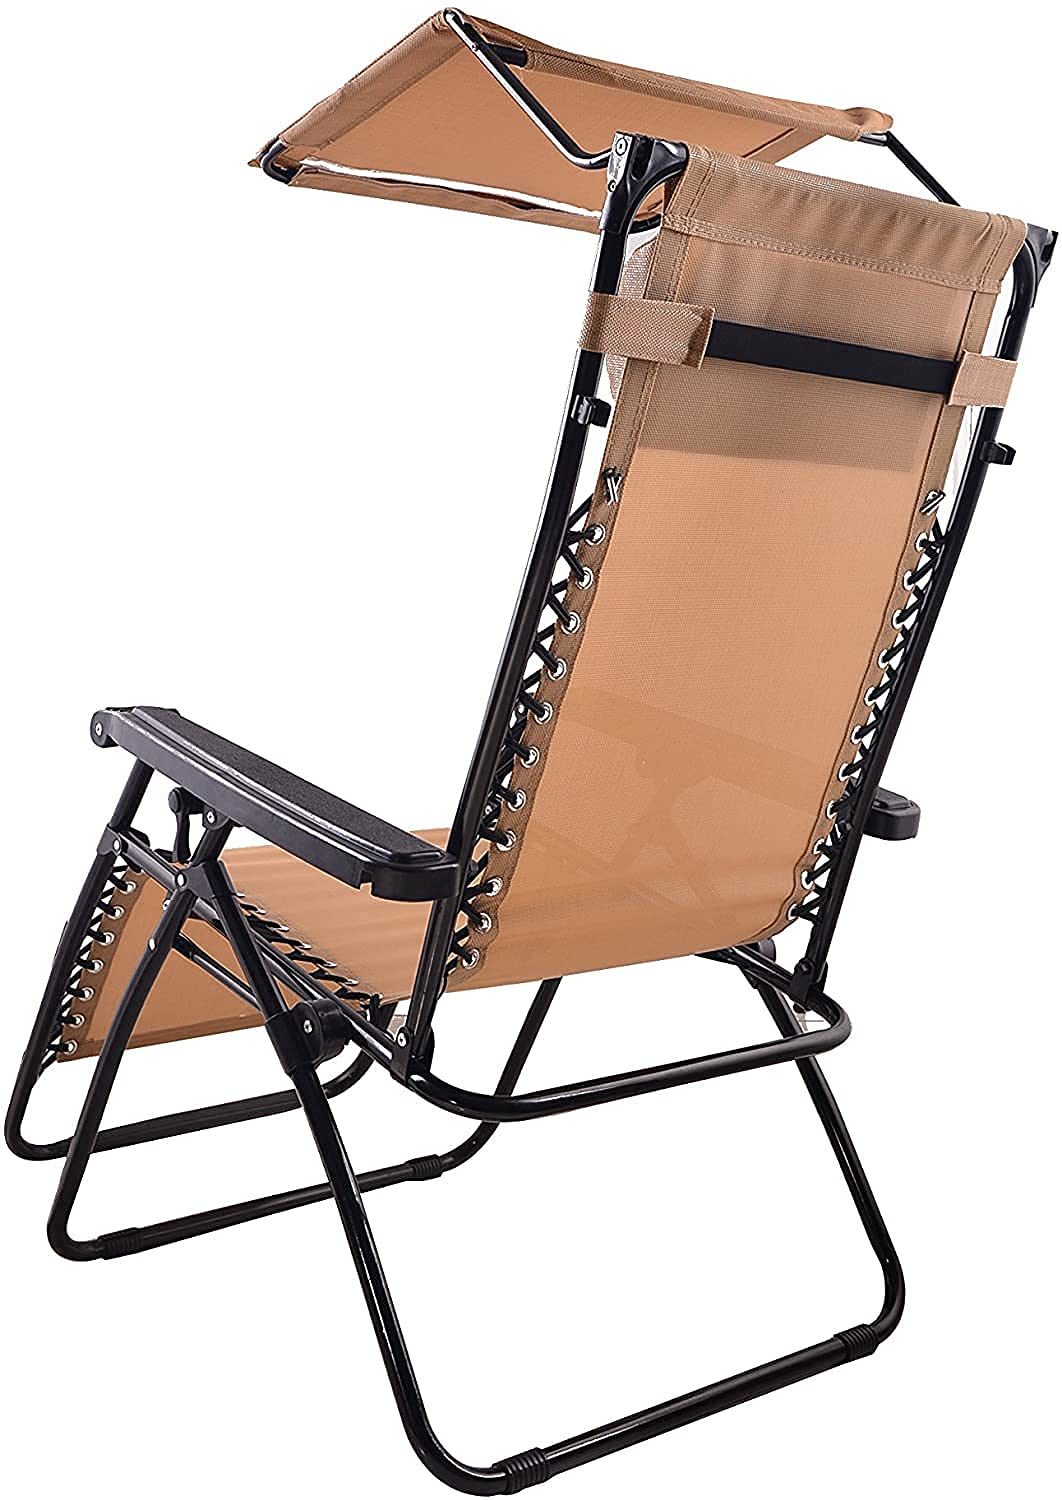 BTEXPERT CC5044BG Zero Gravity Chair Case Lounge Outdoor Patio Beach Yard Garden with Utility Tray Cup Holder Beige (One Piece, Tan with Canopy) One Piece